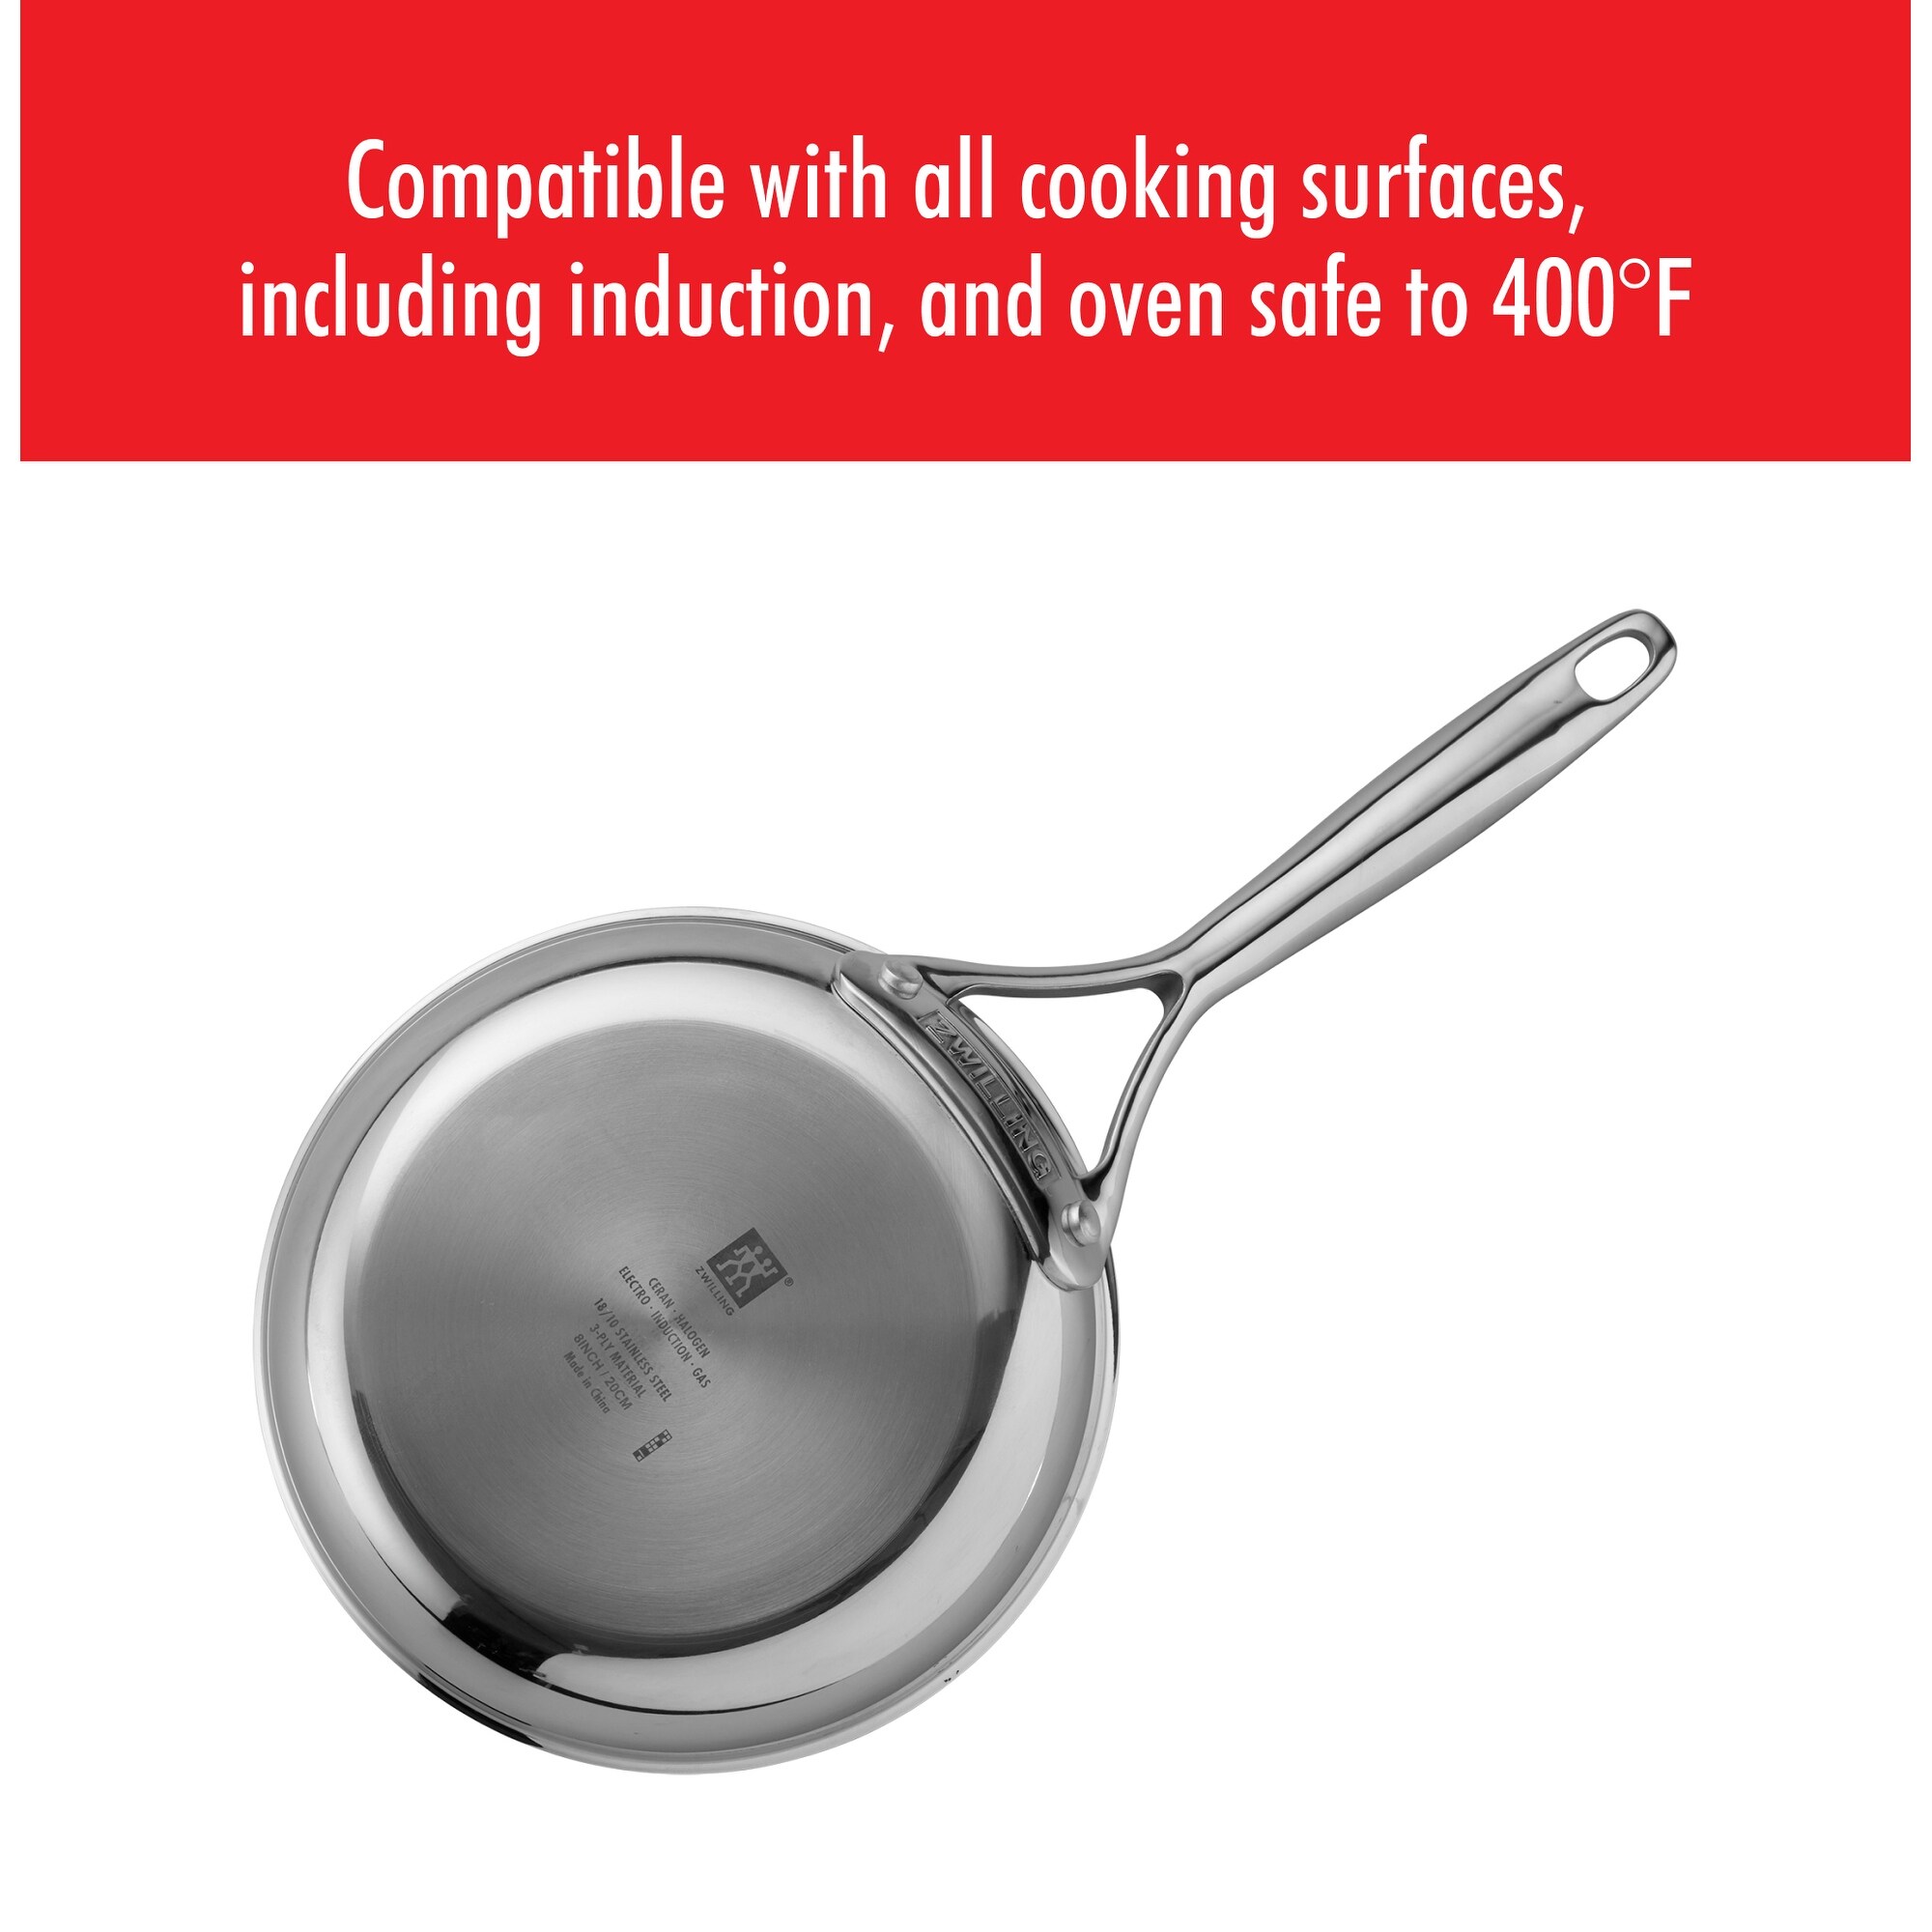 ZWILLING Energy Plus 13-pc Stainless Steel Ceramic Nonstick Cookware Set 